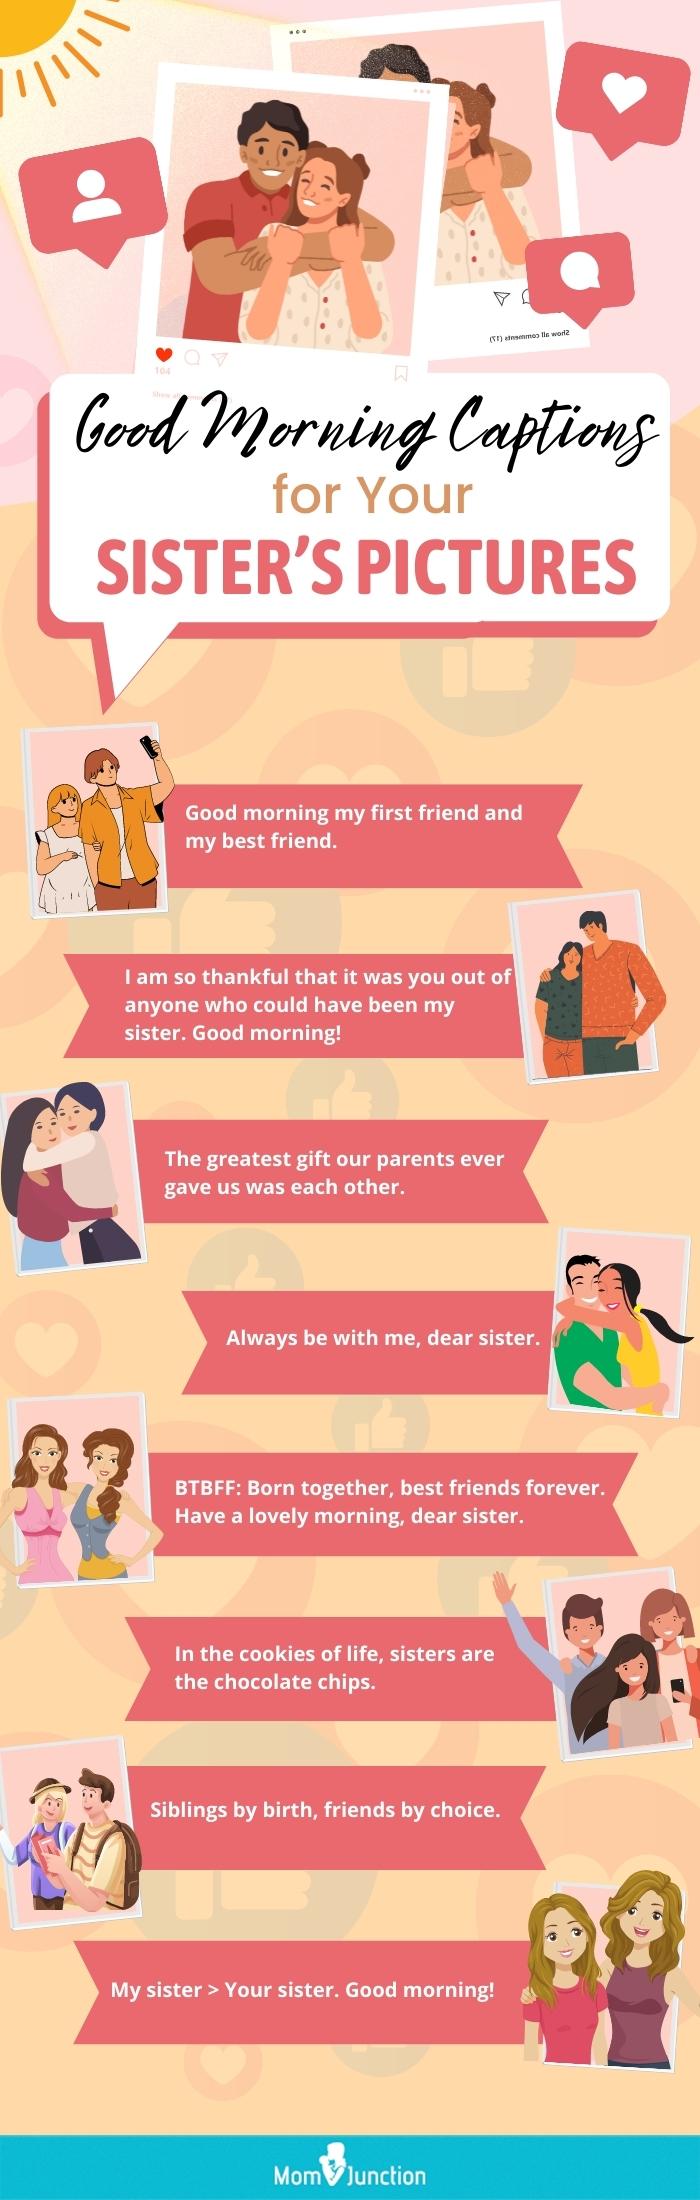 good morning captions to post your sister’s pictures (infographic)